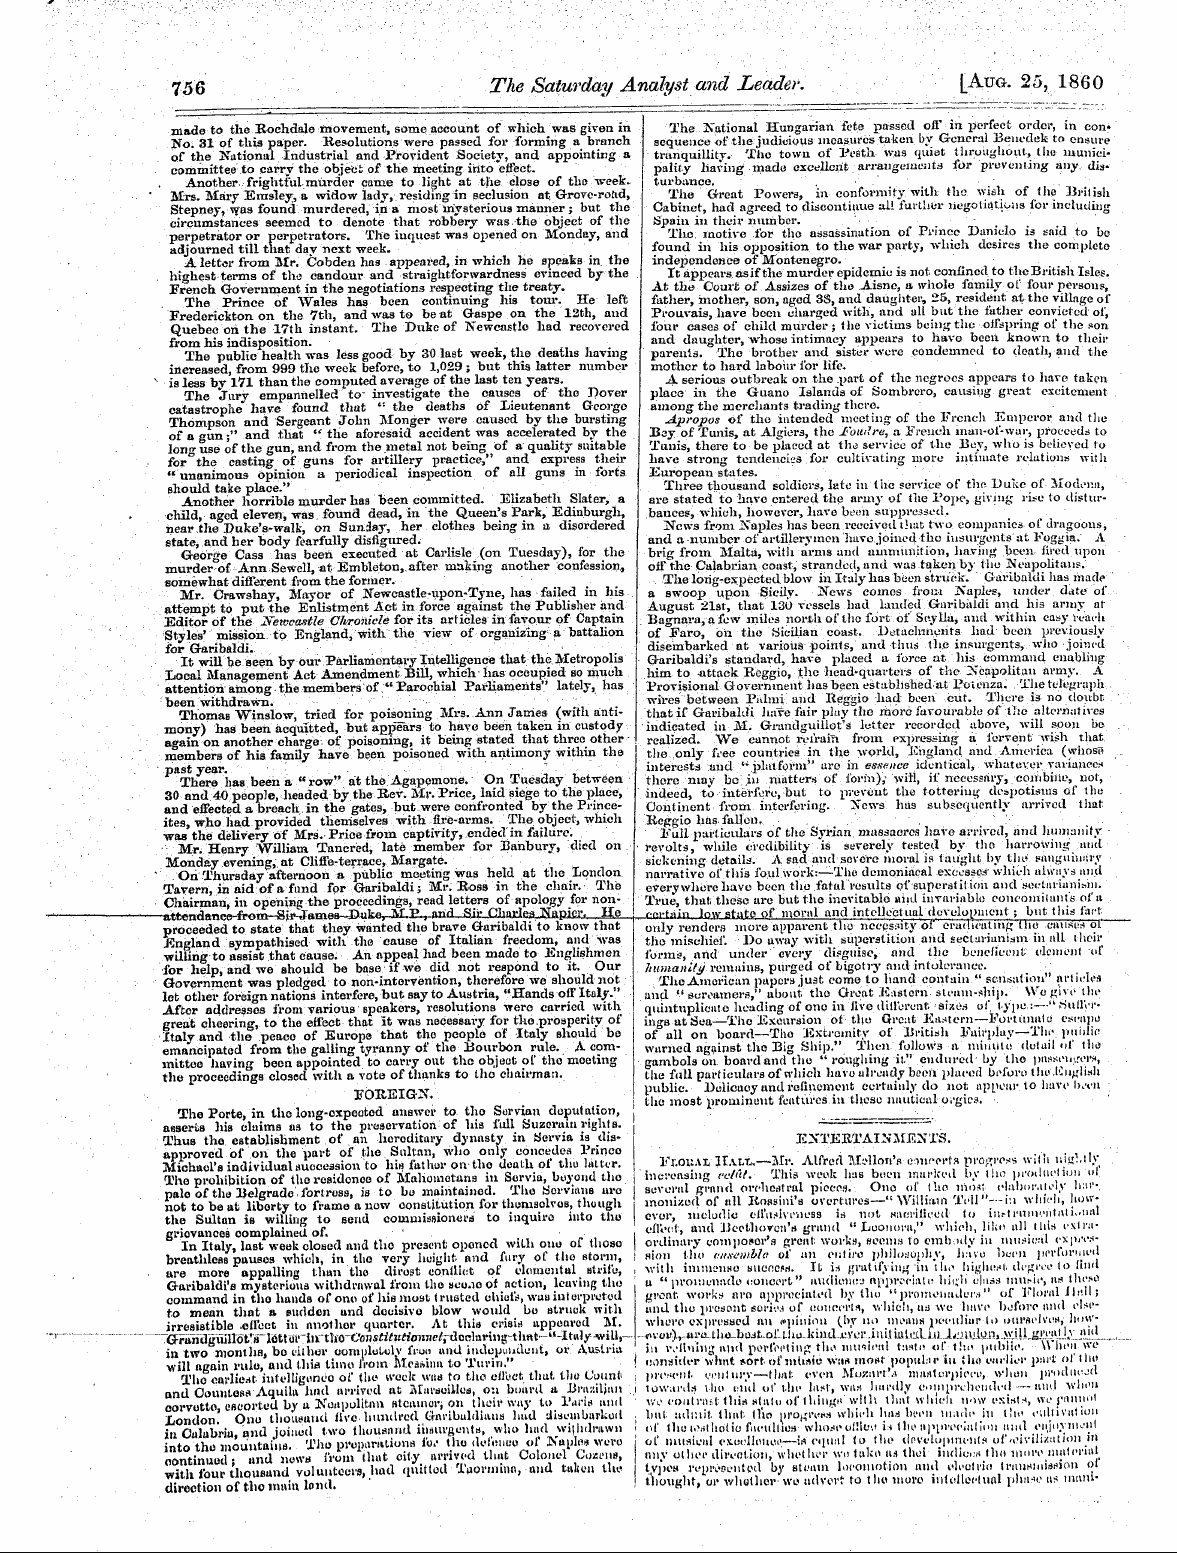 Leader (1850-1860): jS F Y, 1st edition - Foreign.